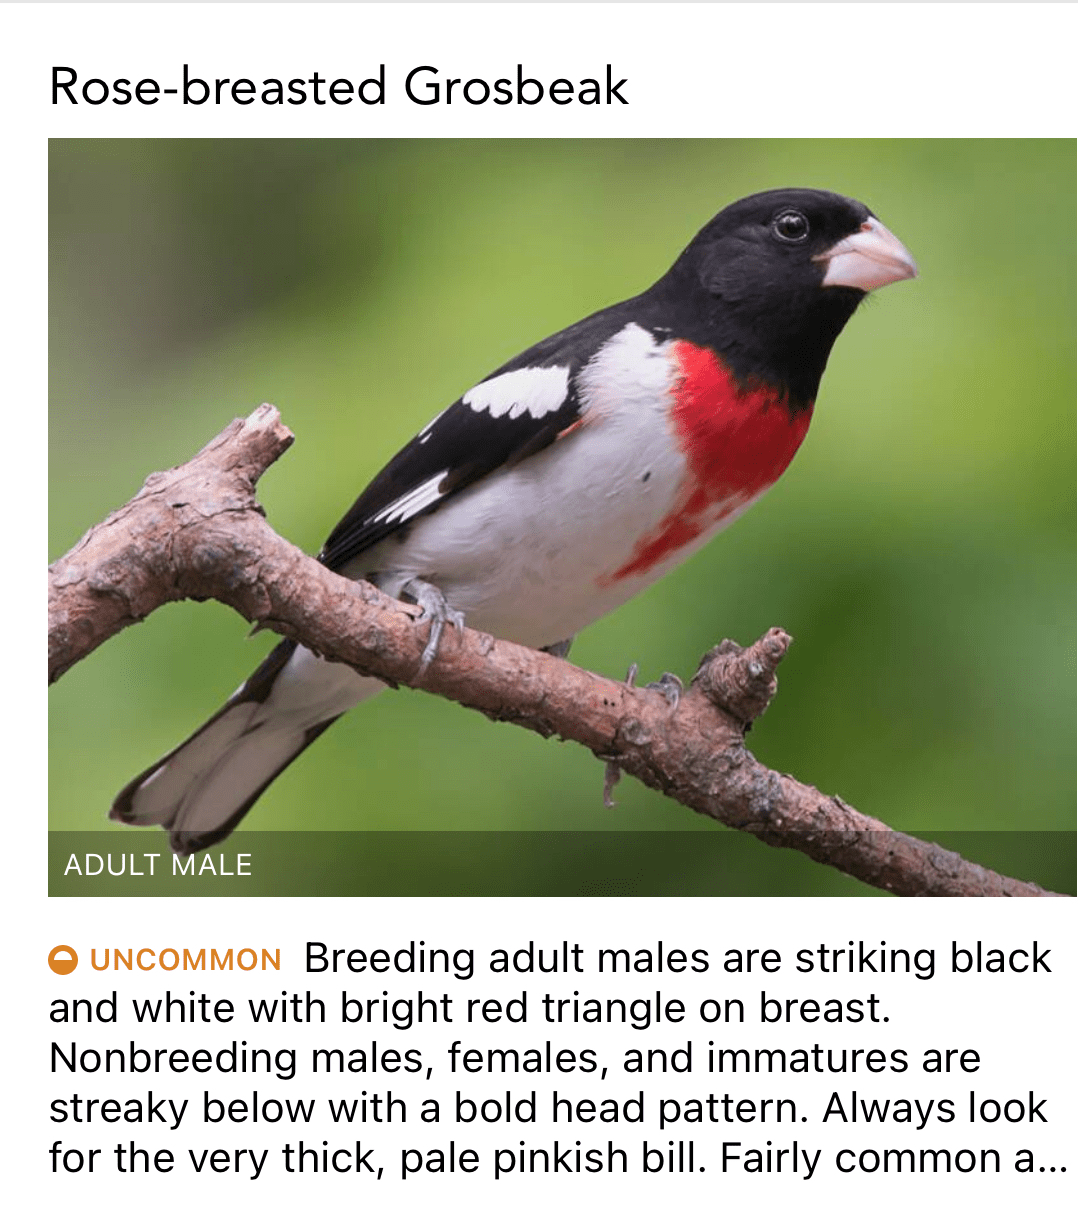 Rose-breasted Grosbeak resting on a branch.